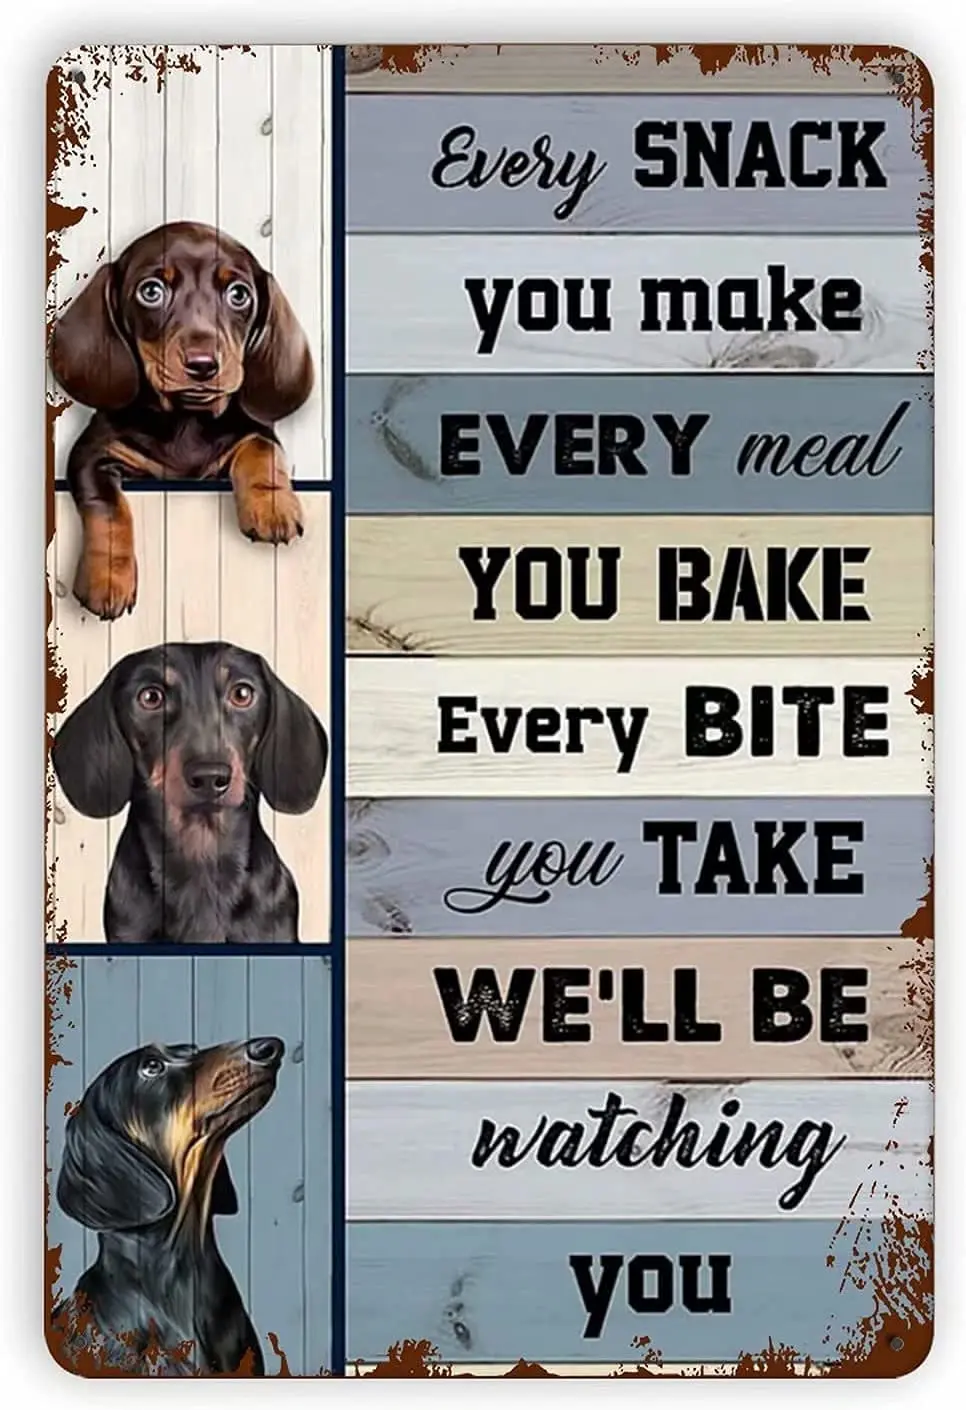 

Funny Dachshund Dog Aluminum Metal Sign,We Will Be Watching You,Wall Decor Poster Home Bathroom Bedroom Kitchen Bar Cafe